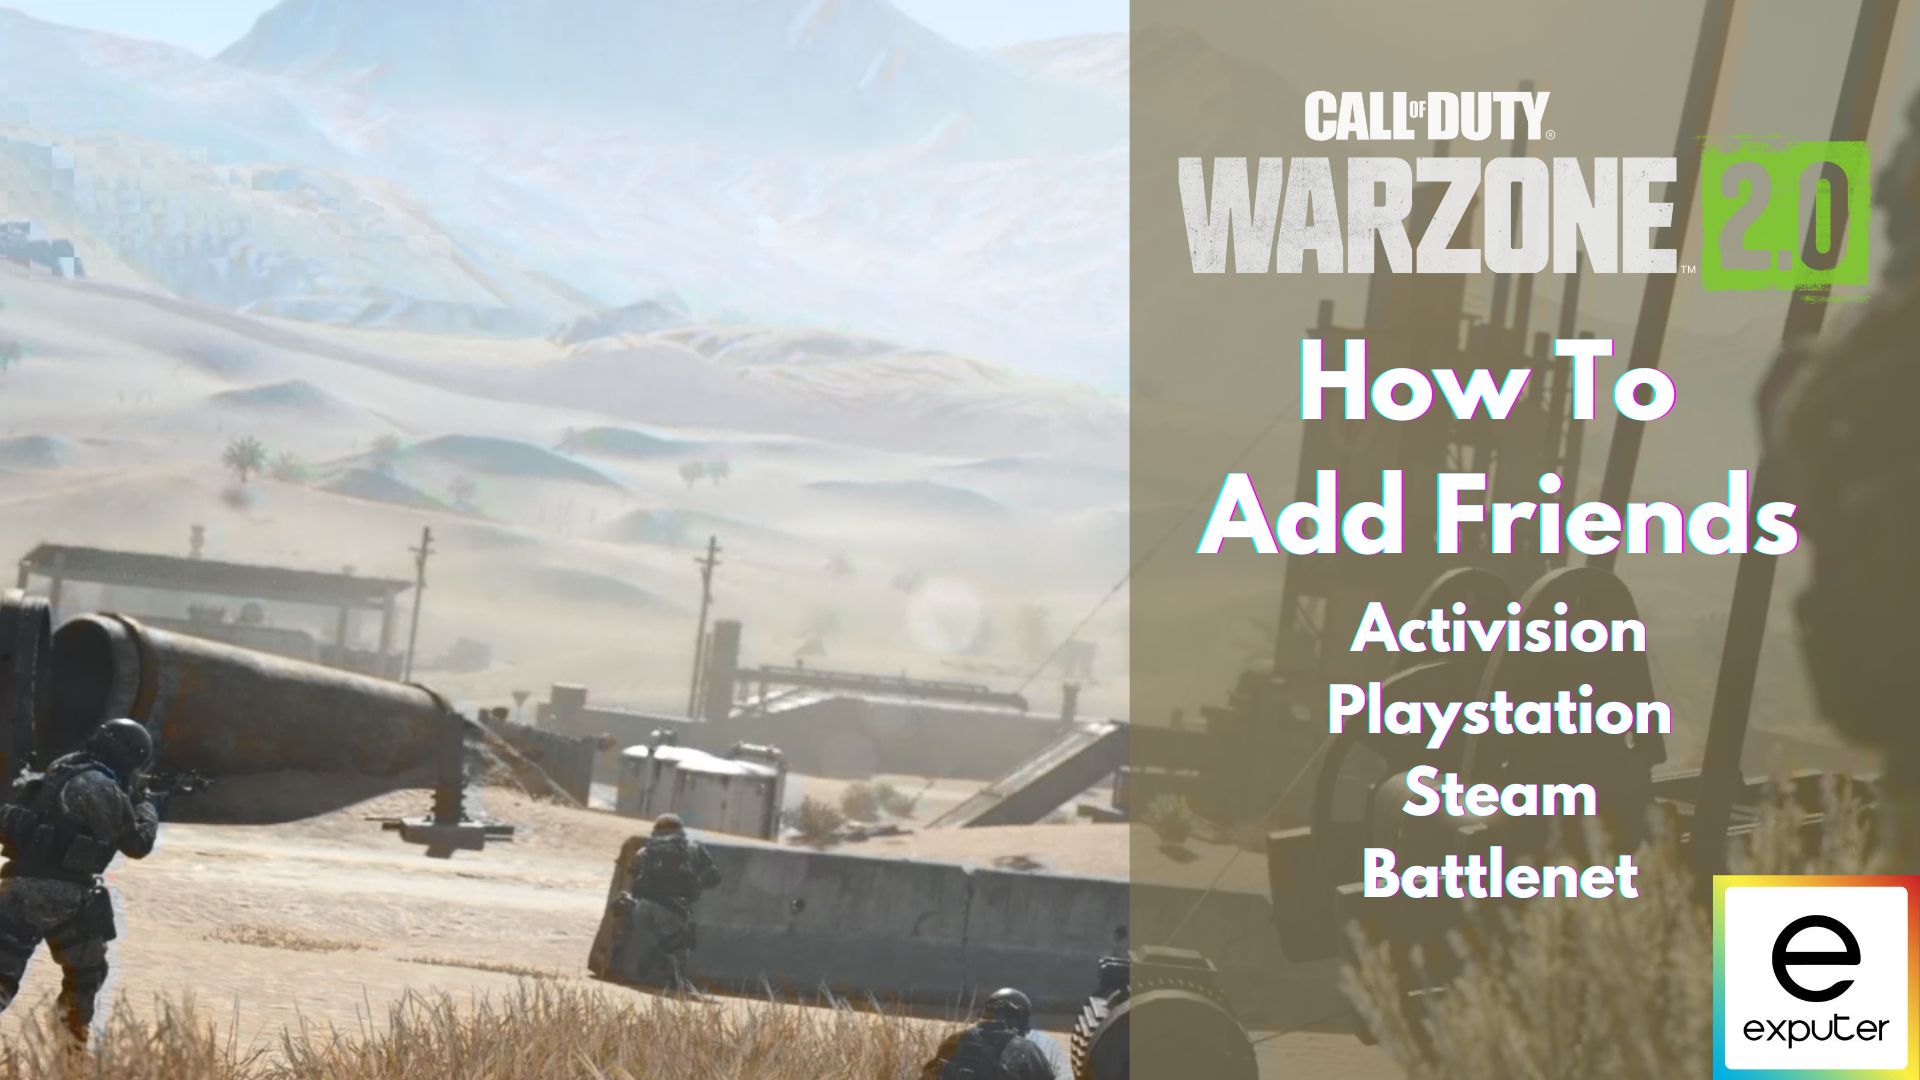 call of duty warzone 2.0 how to add friends and invite to party